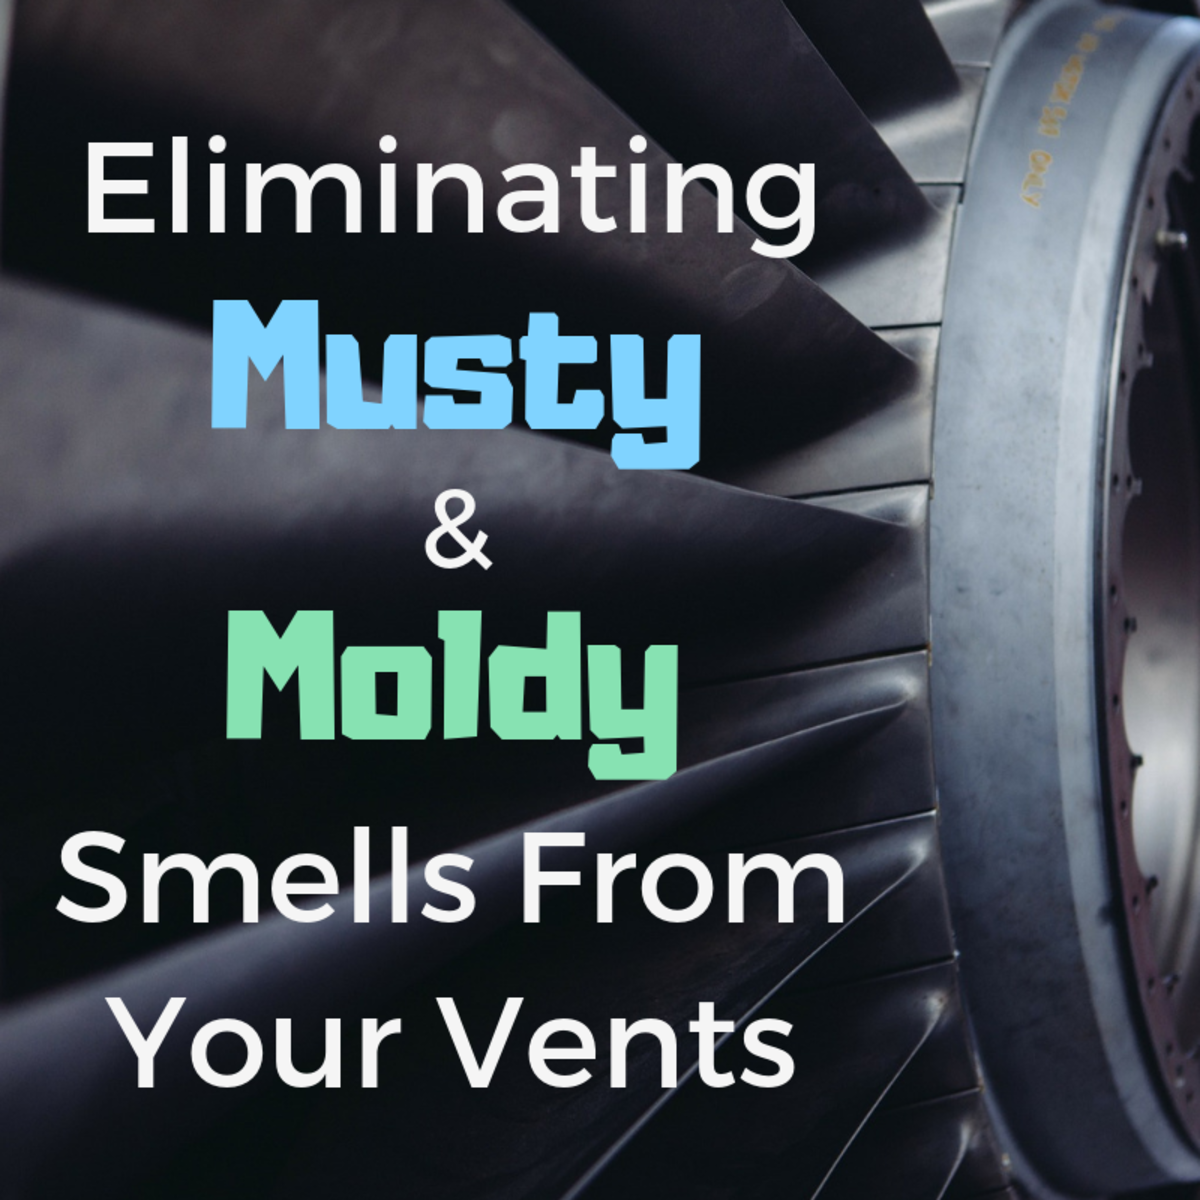 How to Remove Musty and Moldy Air Odors From Your Vents